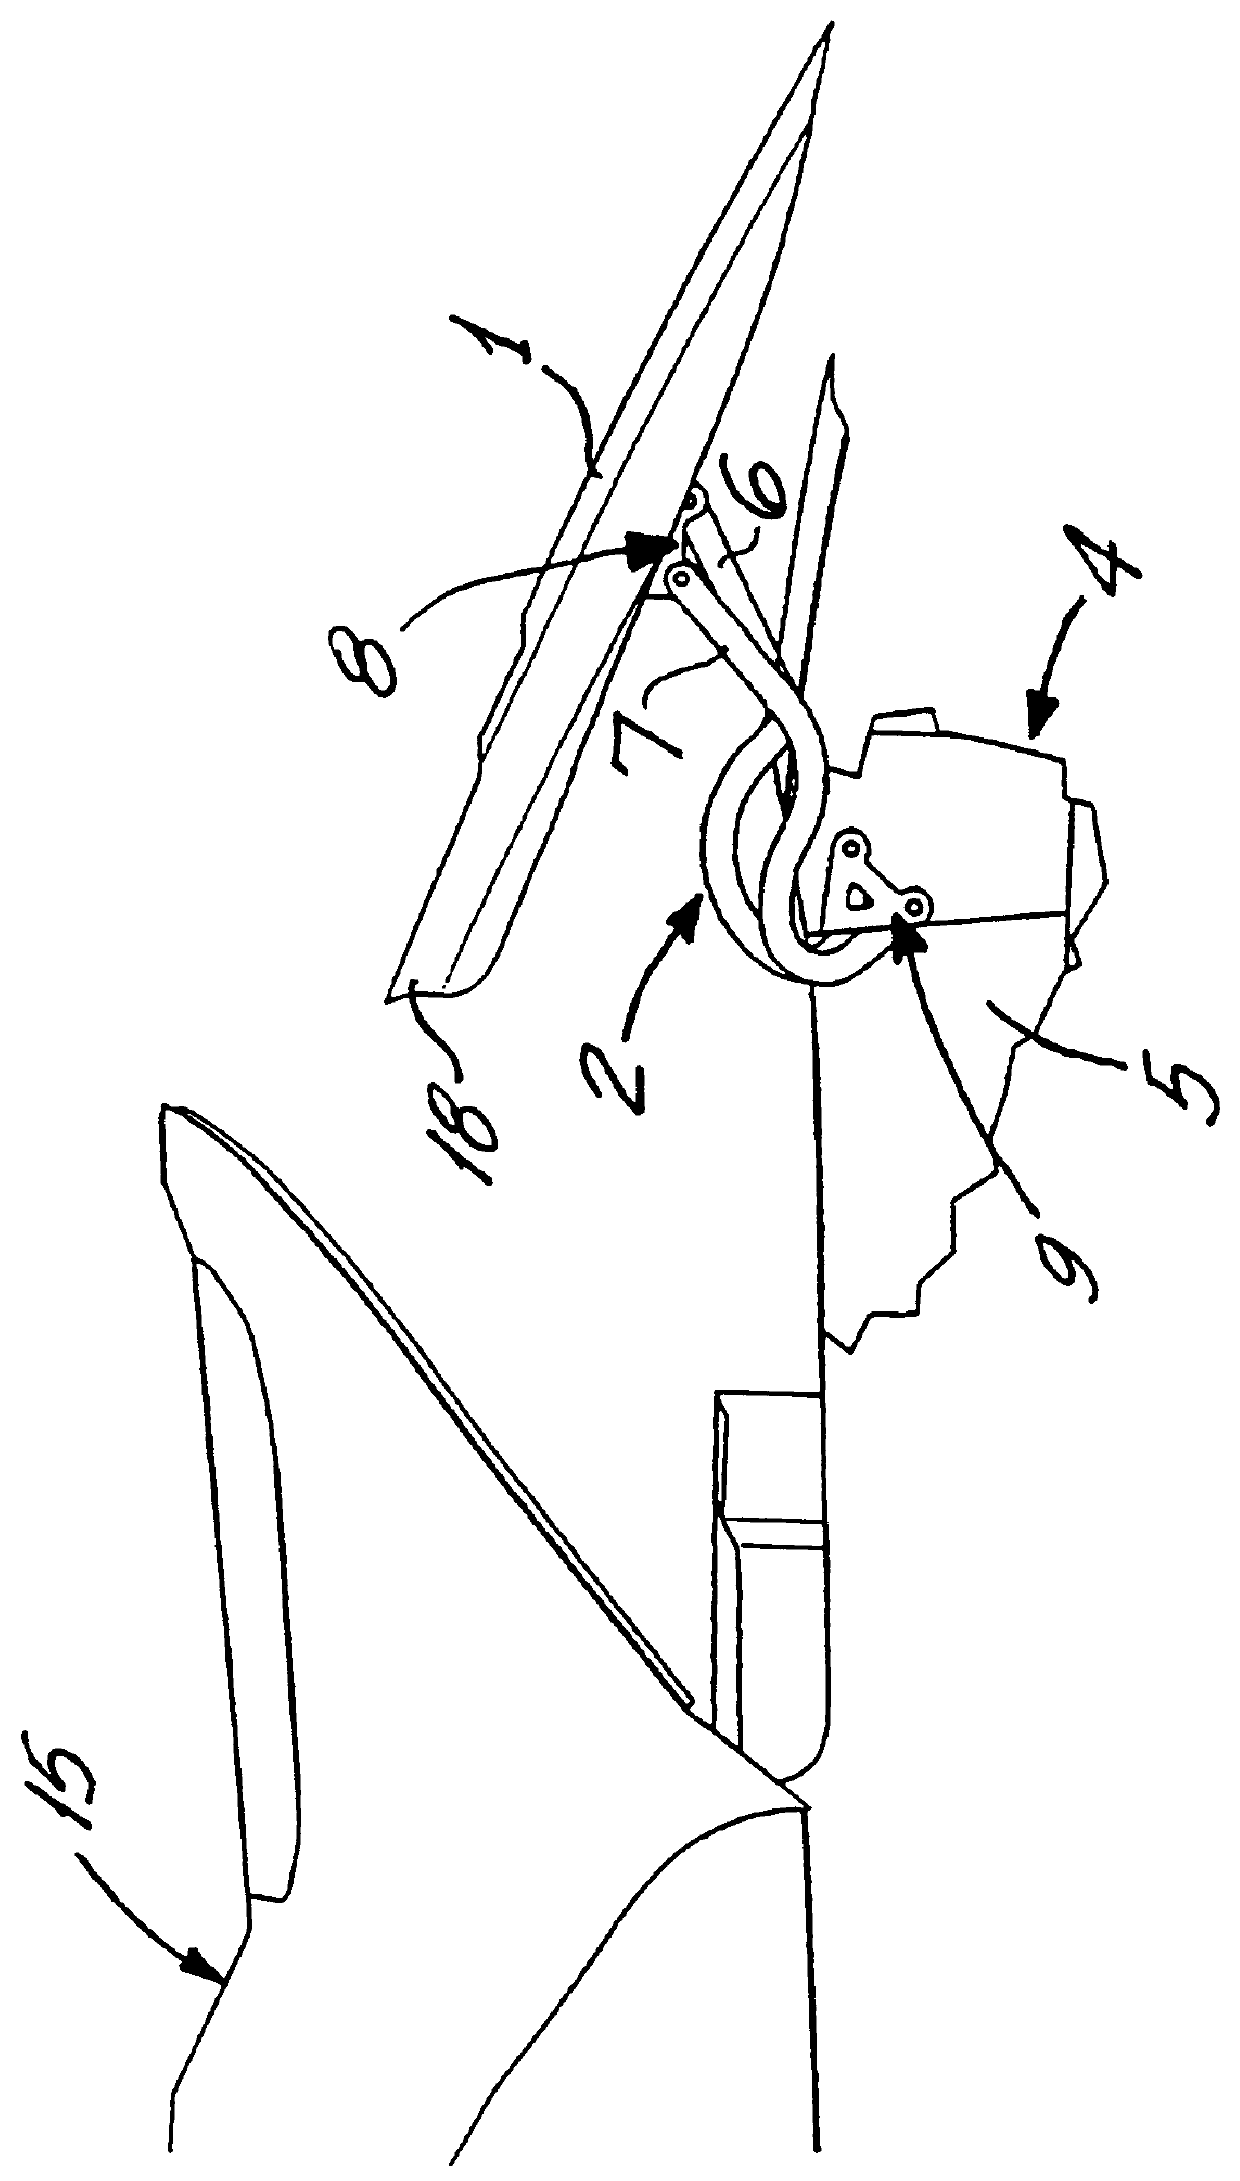 Articulated device for attaching a top storage well cover